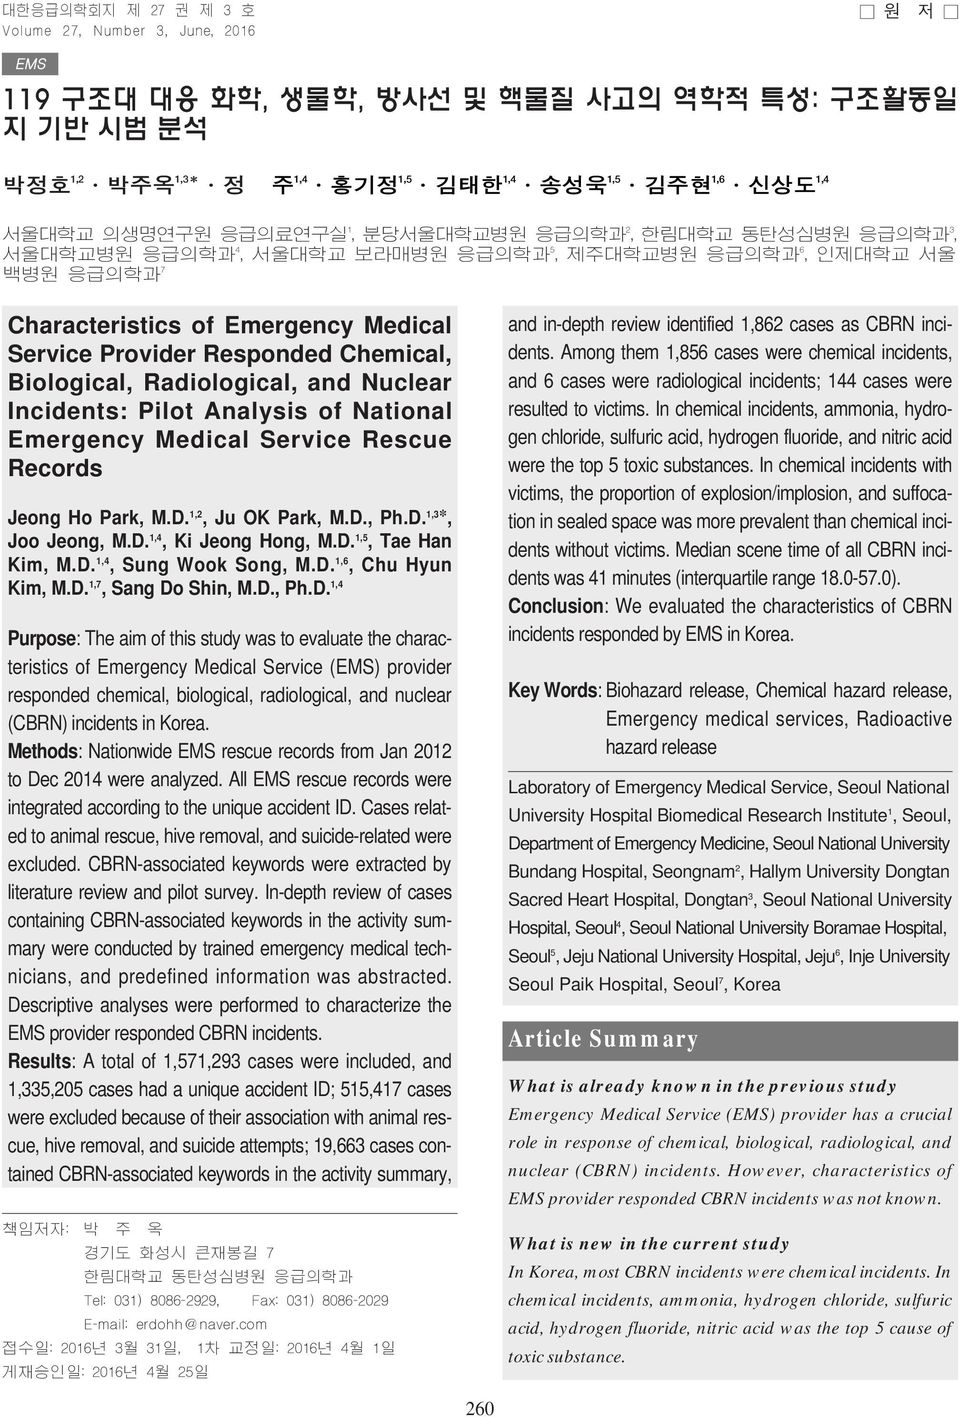 Chemical, Biological, Radiological, and Nuclear Incidents: Pilot Analysis of National Emergency Medical Service Rescue Records Jeong Ho Park, M.D. 1,2, Ju OK Park, M.D., Ph.D. 1,3 *, Joo Jeong, M.D. 1,4, Ki Jeong Hong, M.